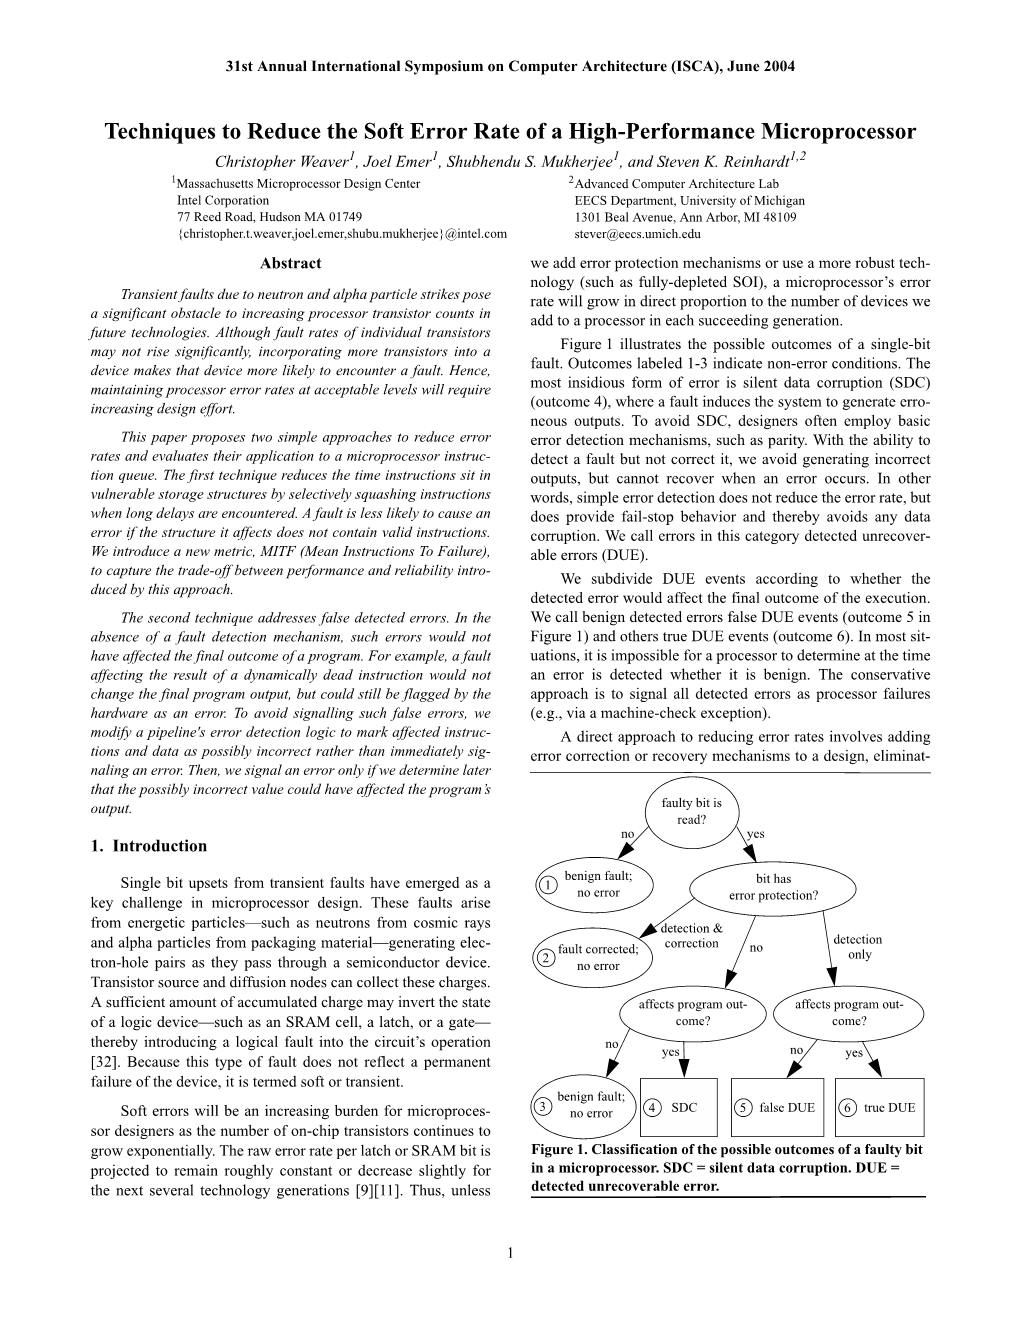 Techniques to Reduce the Soft Error Rate of a High-Performance Microprocessor Christopher Weaver1, Joel Emer1, Shubhendu S